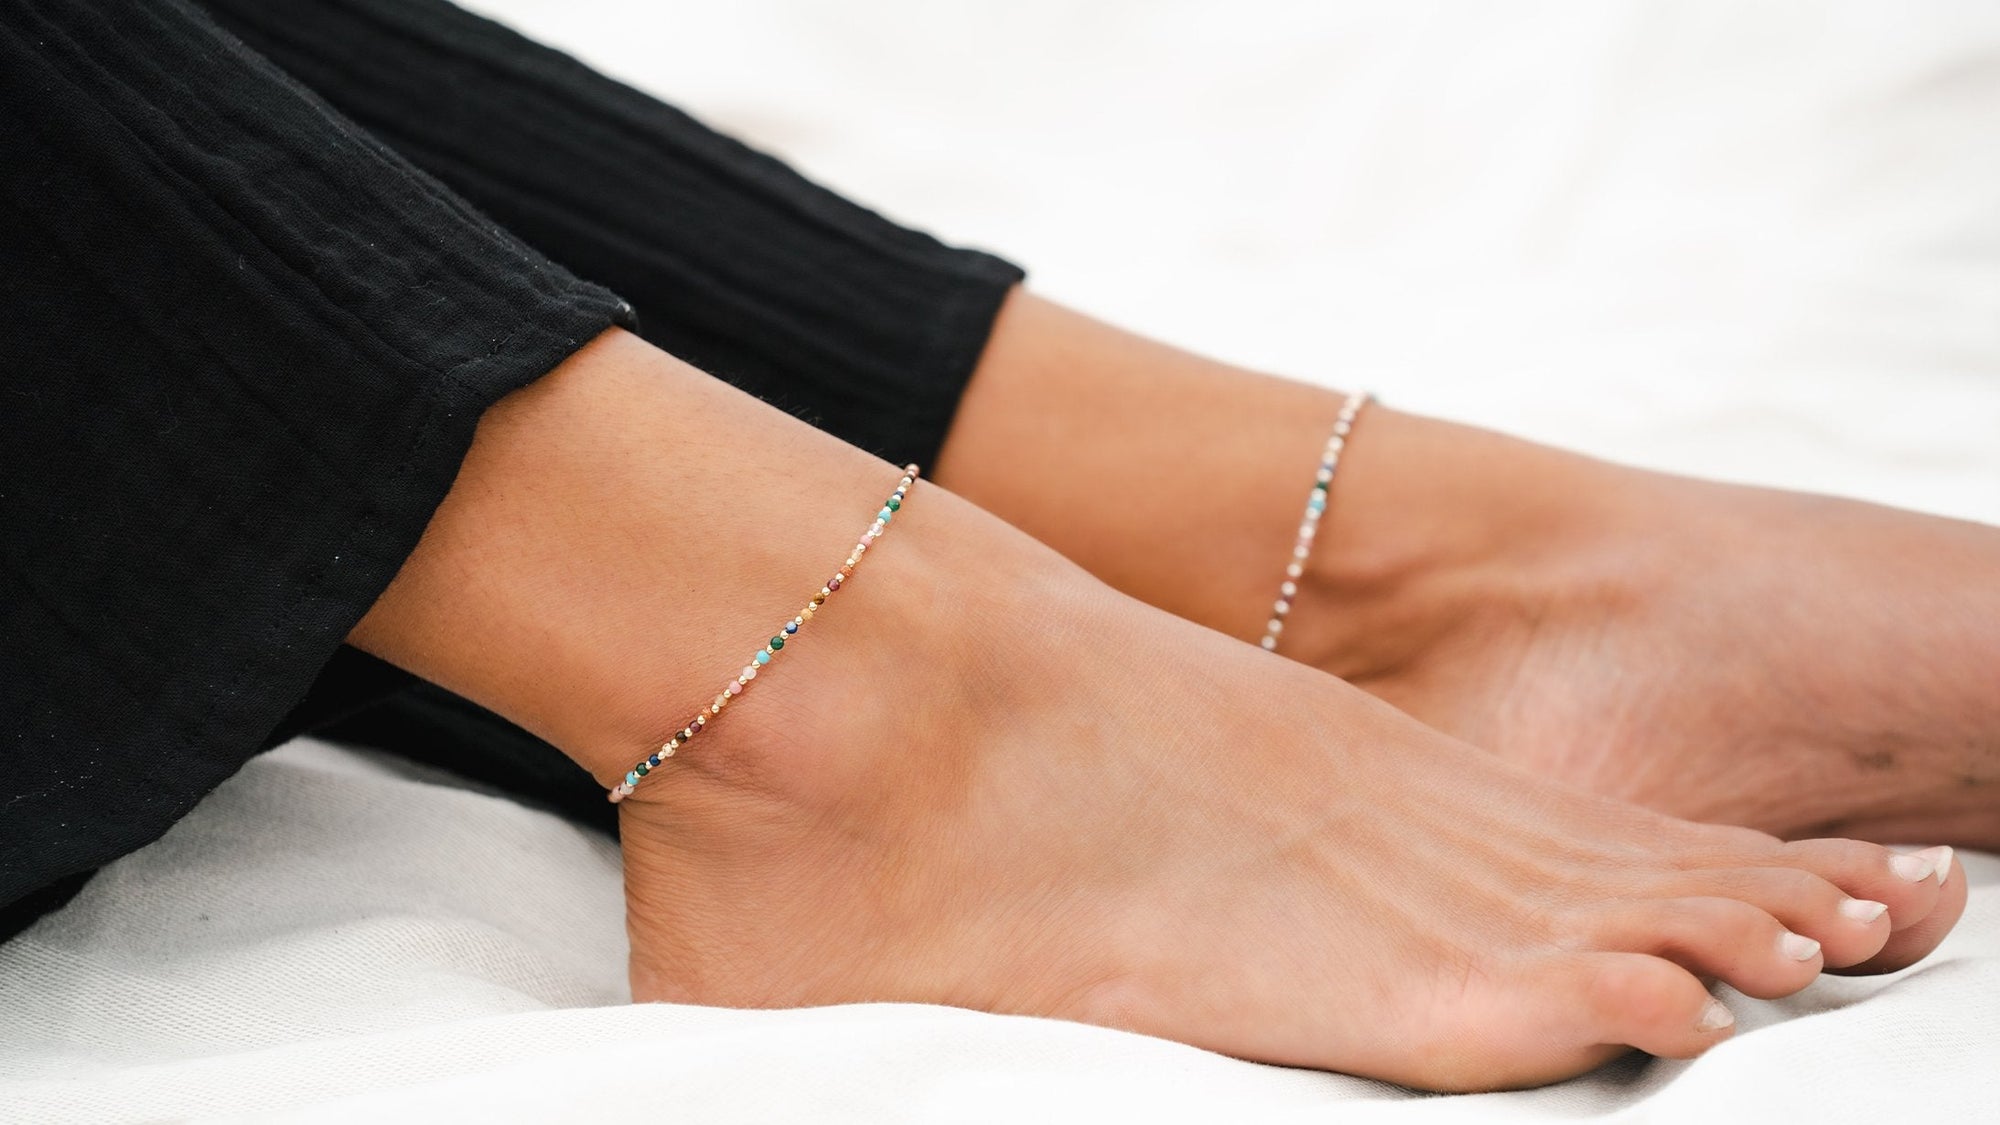 Woman wearing women's anklet on both feet. Dainty gold anklet on and a dainty silver anklet on the other food. Master Healer healing energy stone anklet.